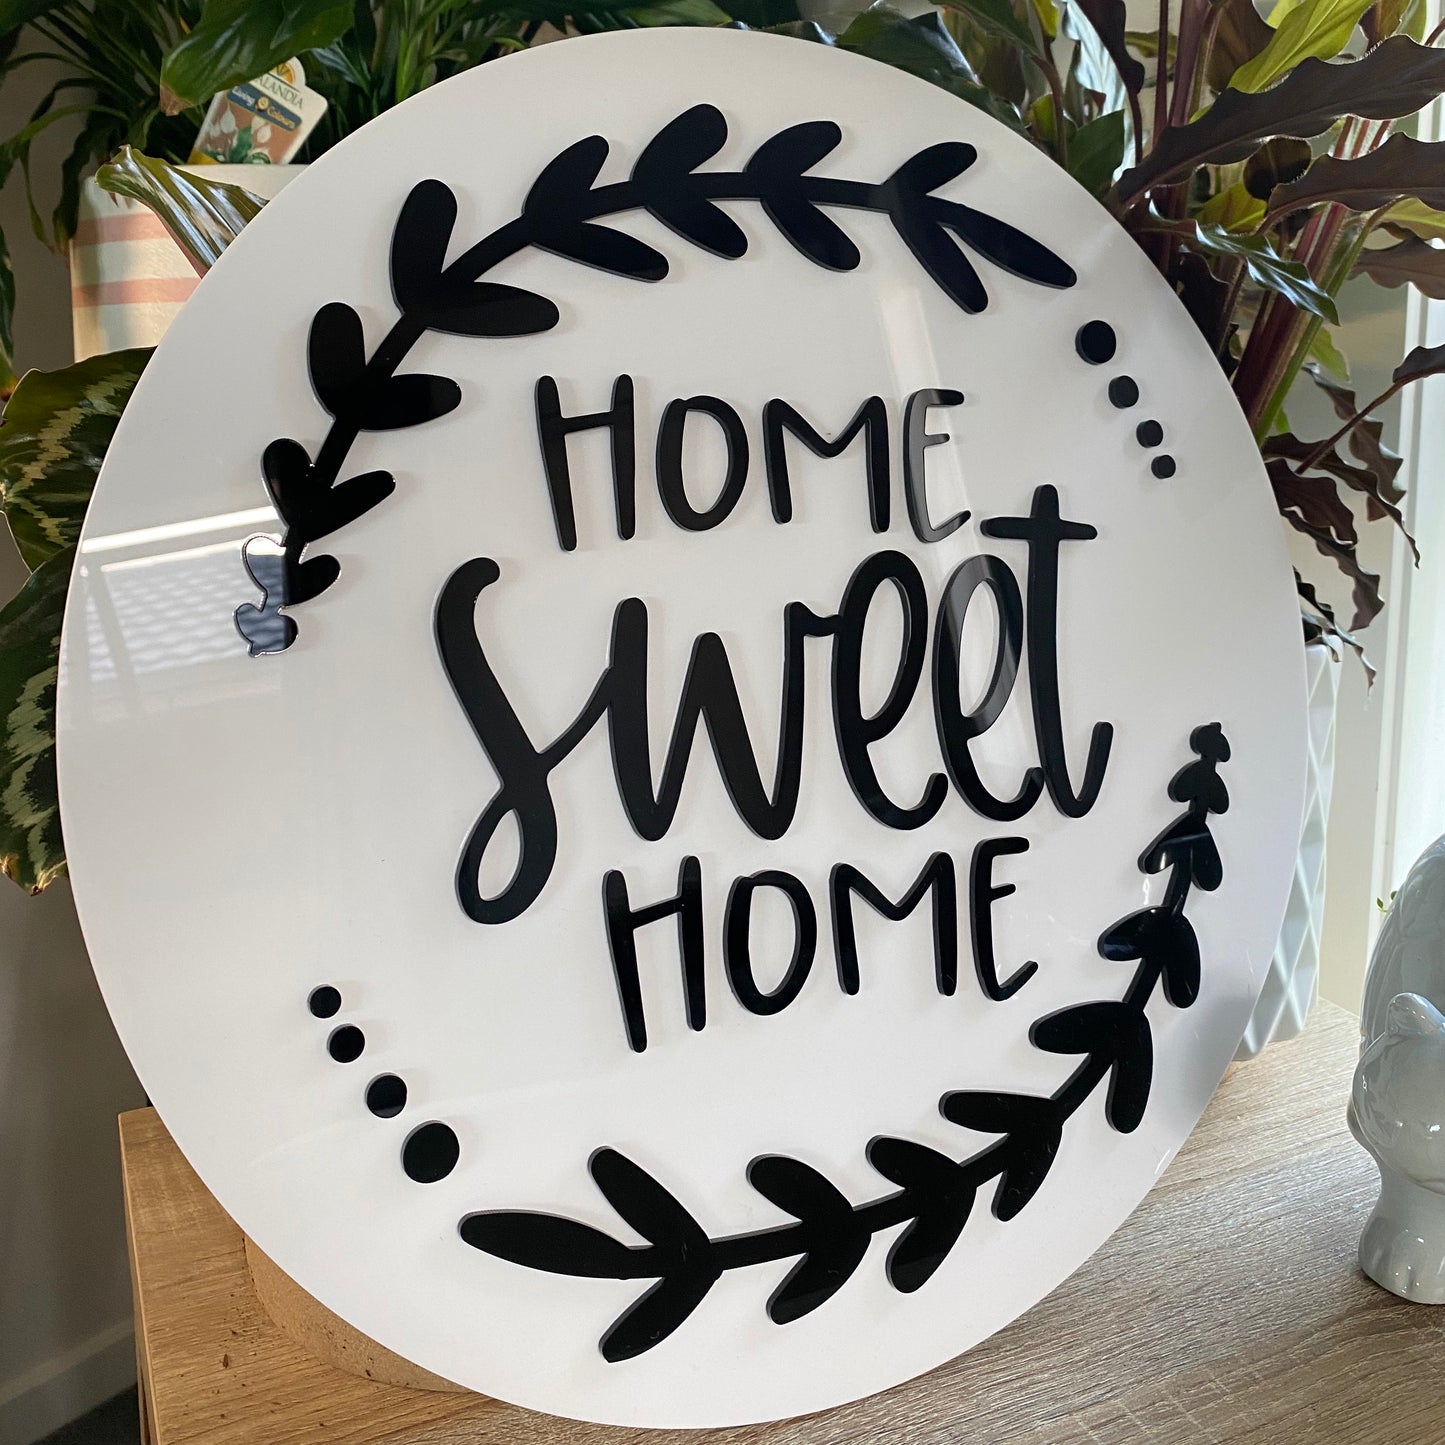 Home Sweet Home - Younique Collective